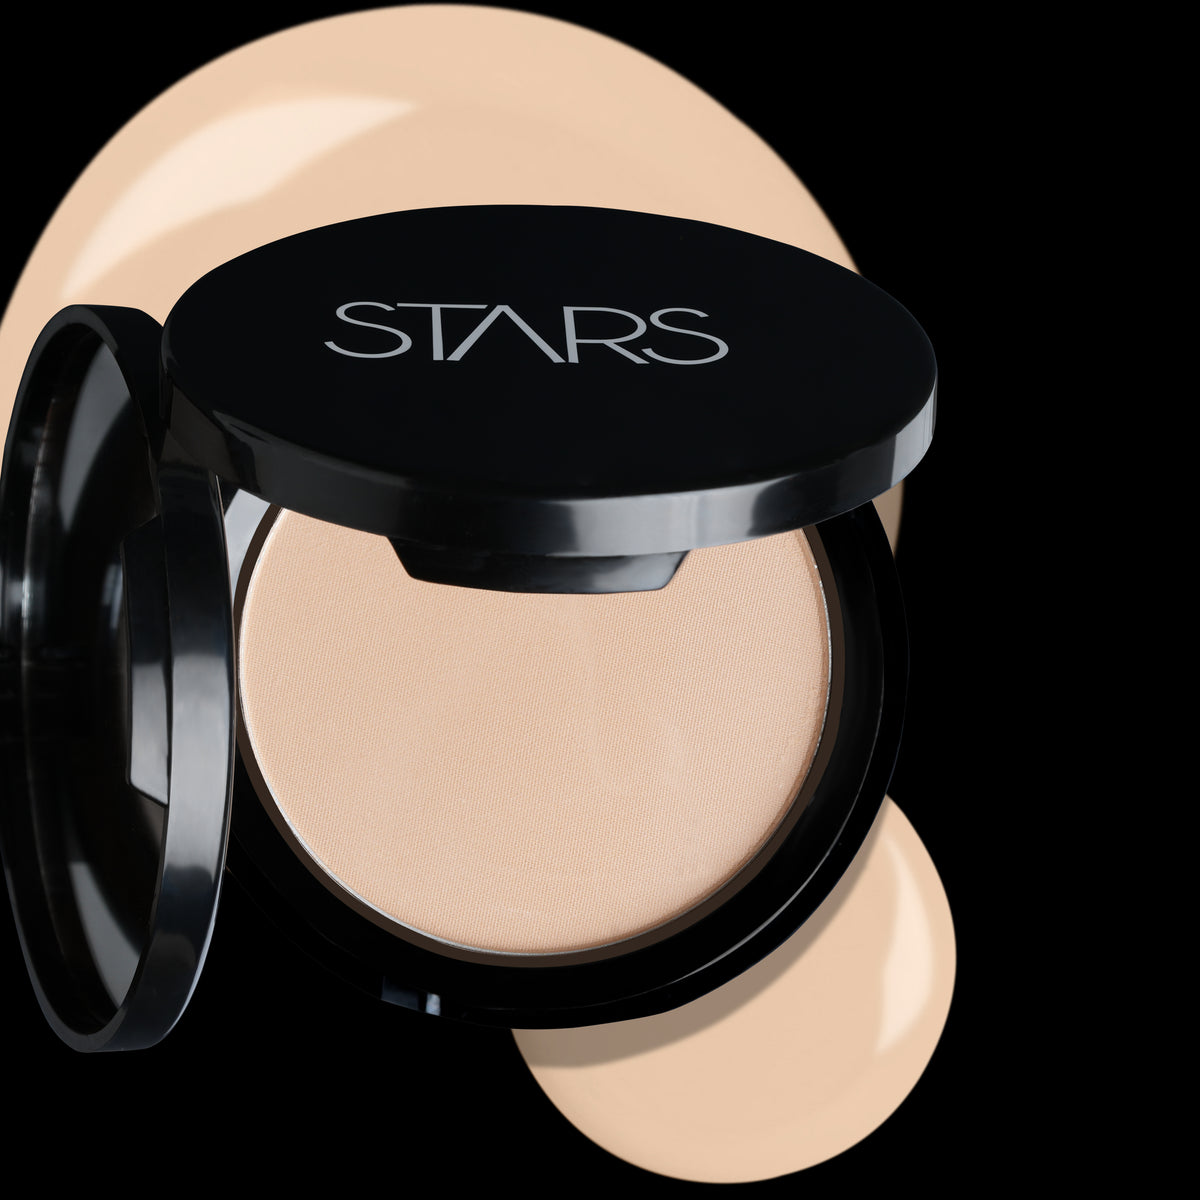 Stars Cosmetics Makeup Products